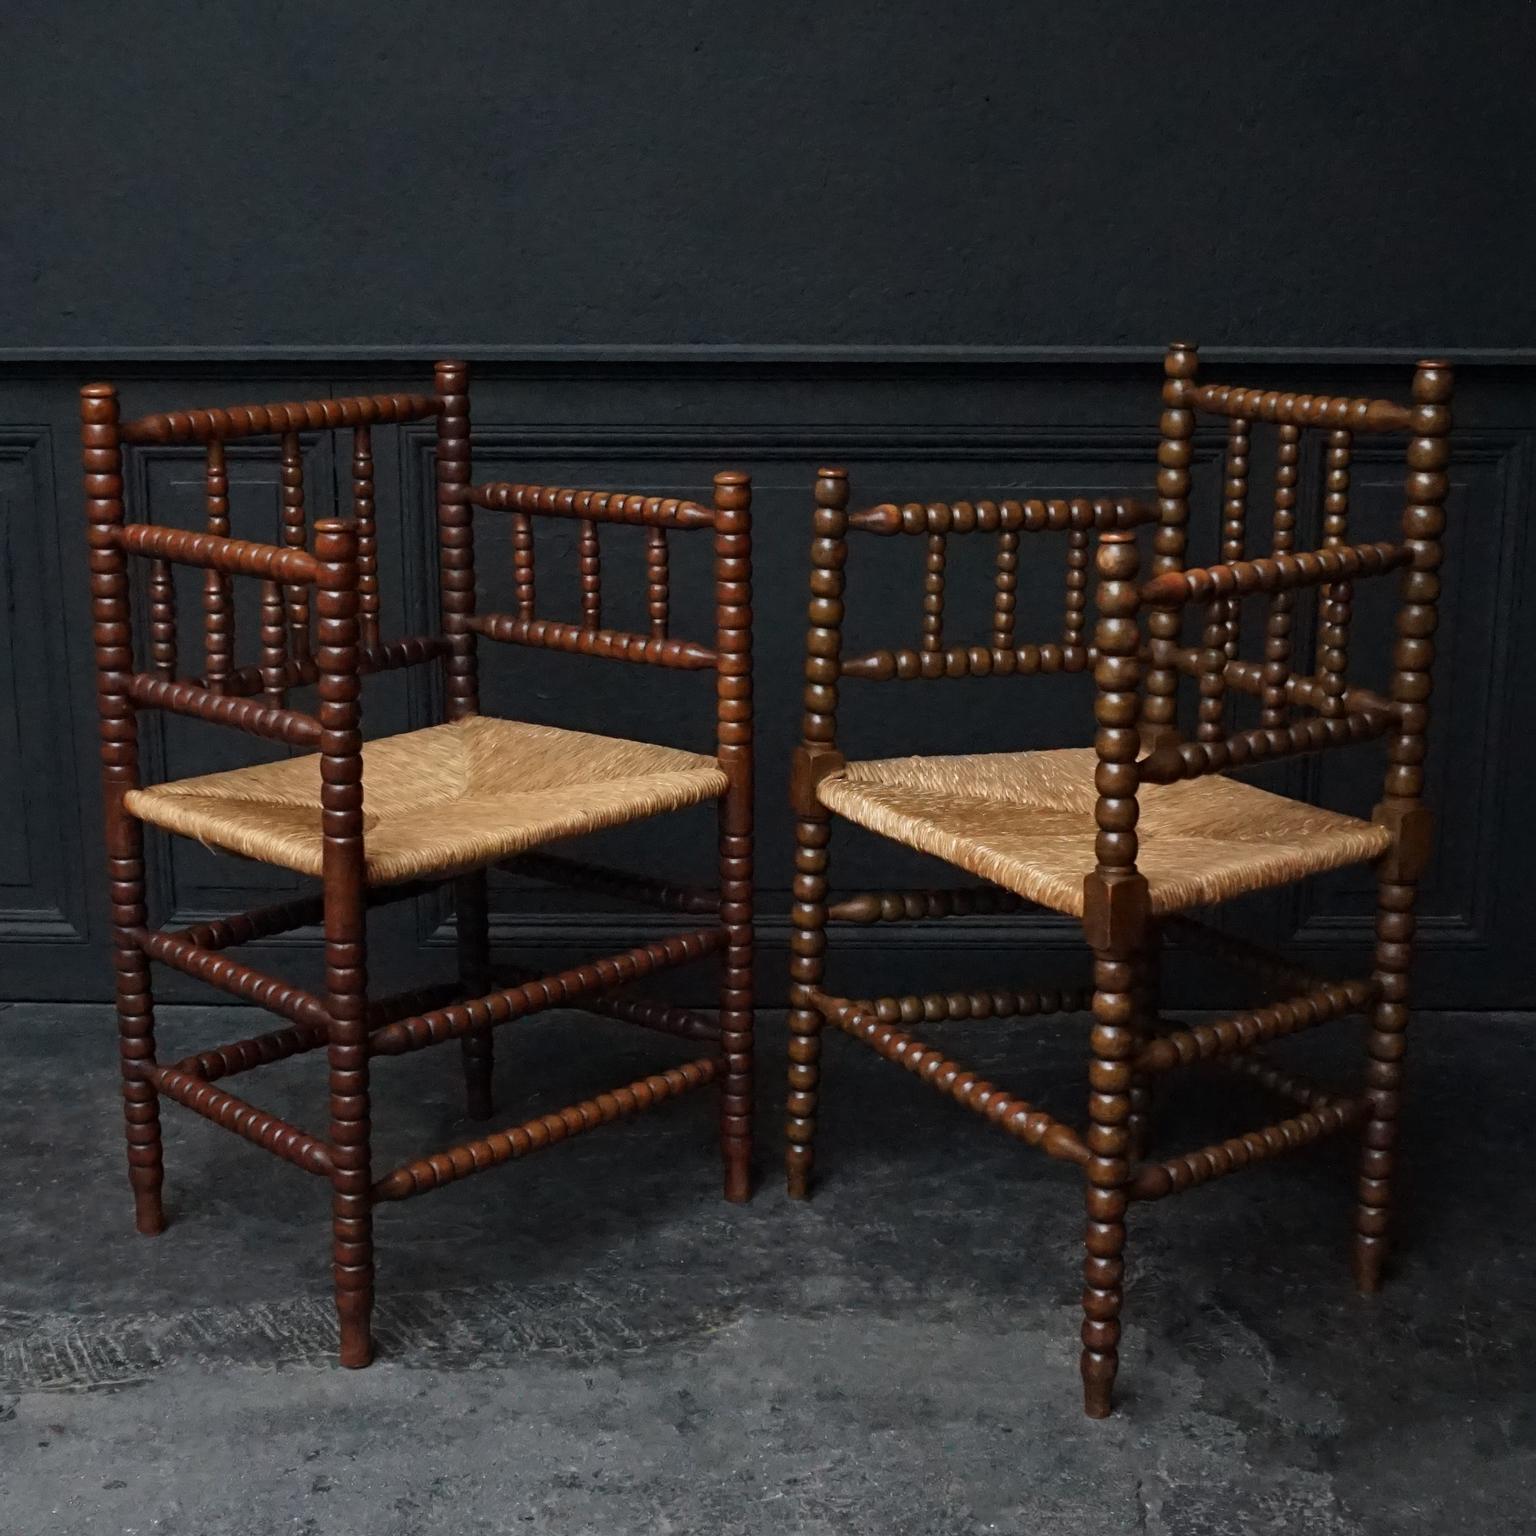 Very pretty set of two 1920s Dutch turned beech bobbin armchairs
The chairs were made in beechwood and both have rush matting seats.

Every section of the frame has a beautifully turned beech wooden structure that creates the bobbins.

This set